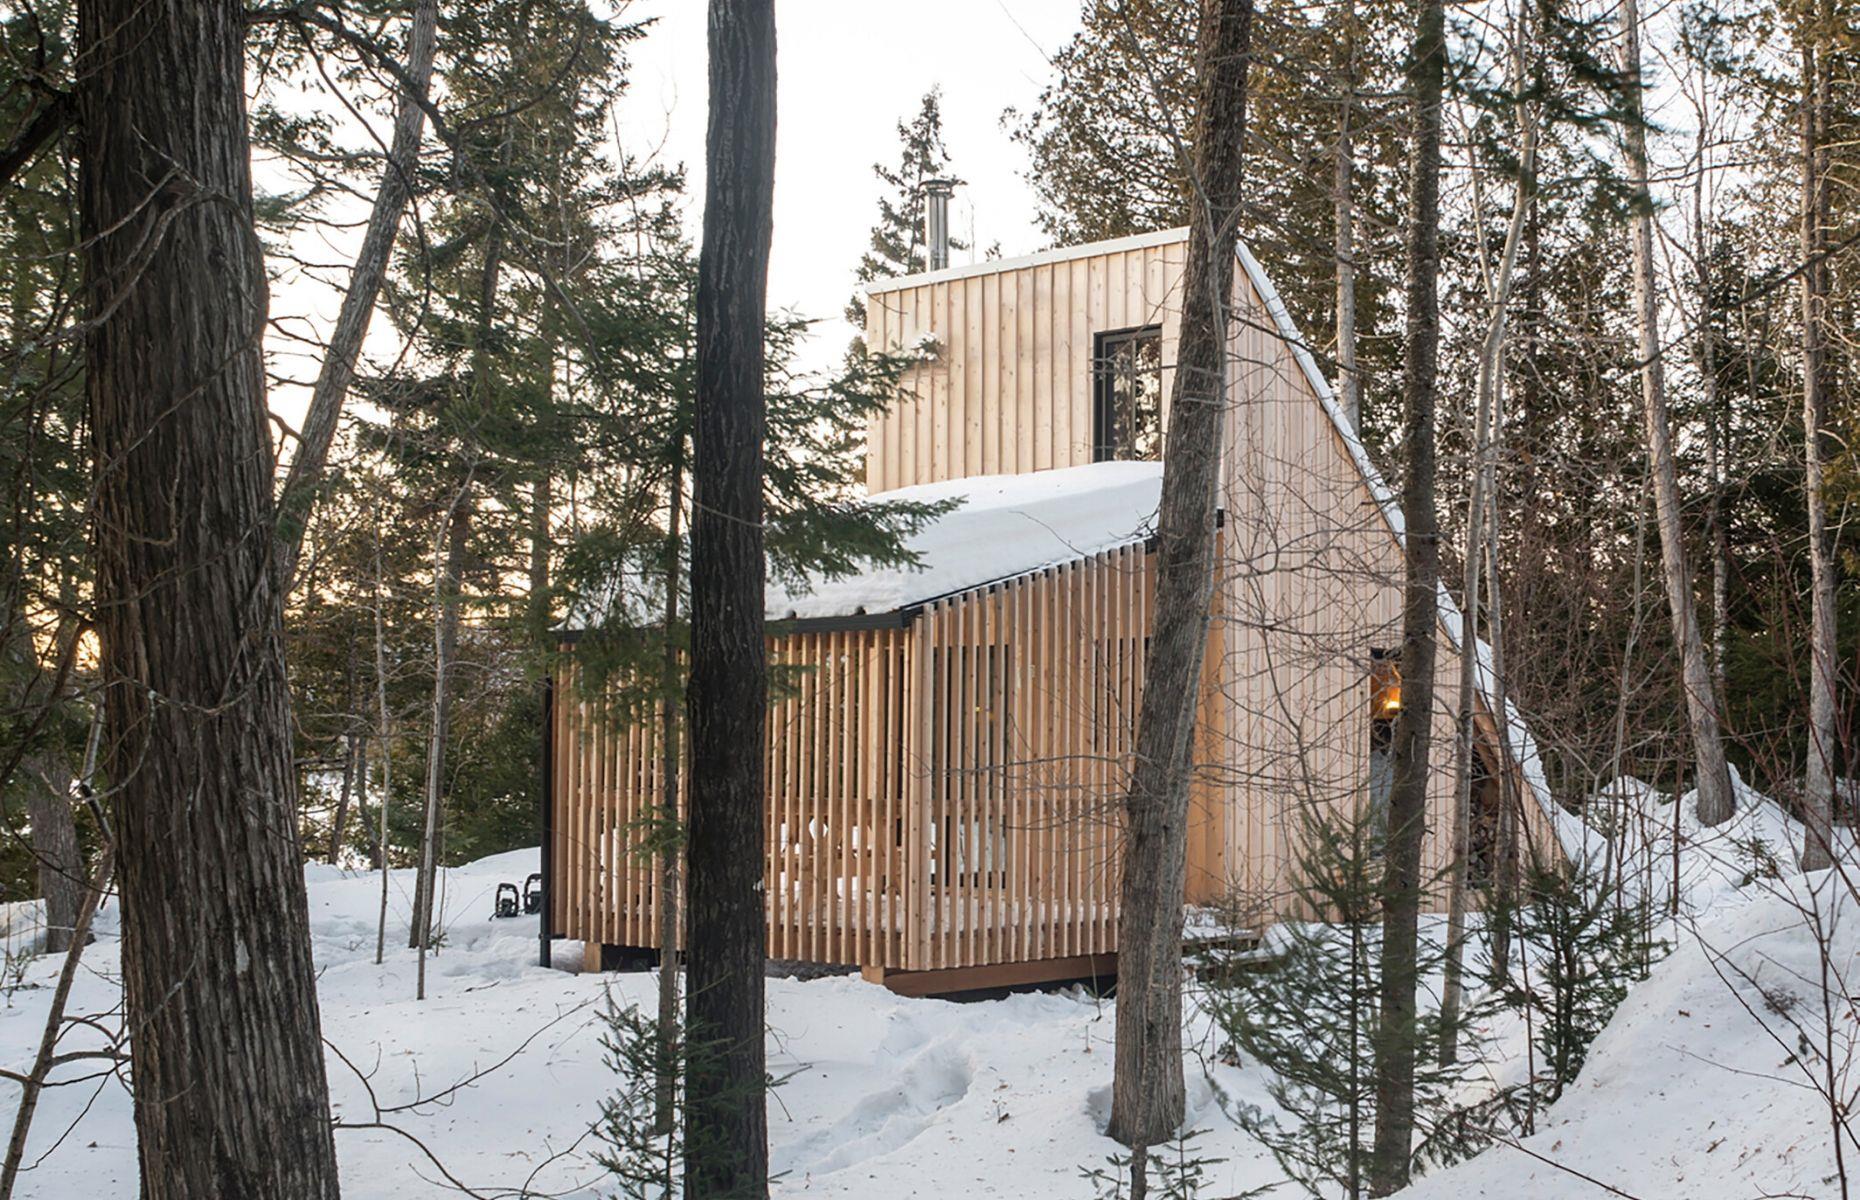 <p>Designed by the architects at <a href="http://labri.ca/">L'Abri</a>, this stunning tiny home can be found concealed inside Poisson Blanc Regional Park, in Ottawa. Known as La Pointe (or The Point), the angular abode is a reinterpretation of classic A-frame buildings popularized across North American during the 1950s. Traditional yet modern in its aesthetic, the dwelling sits completely off-the-grid and is powered entirely by solar rays!</p>